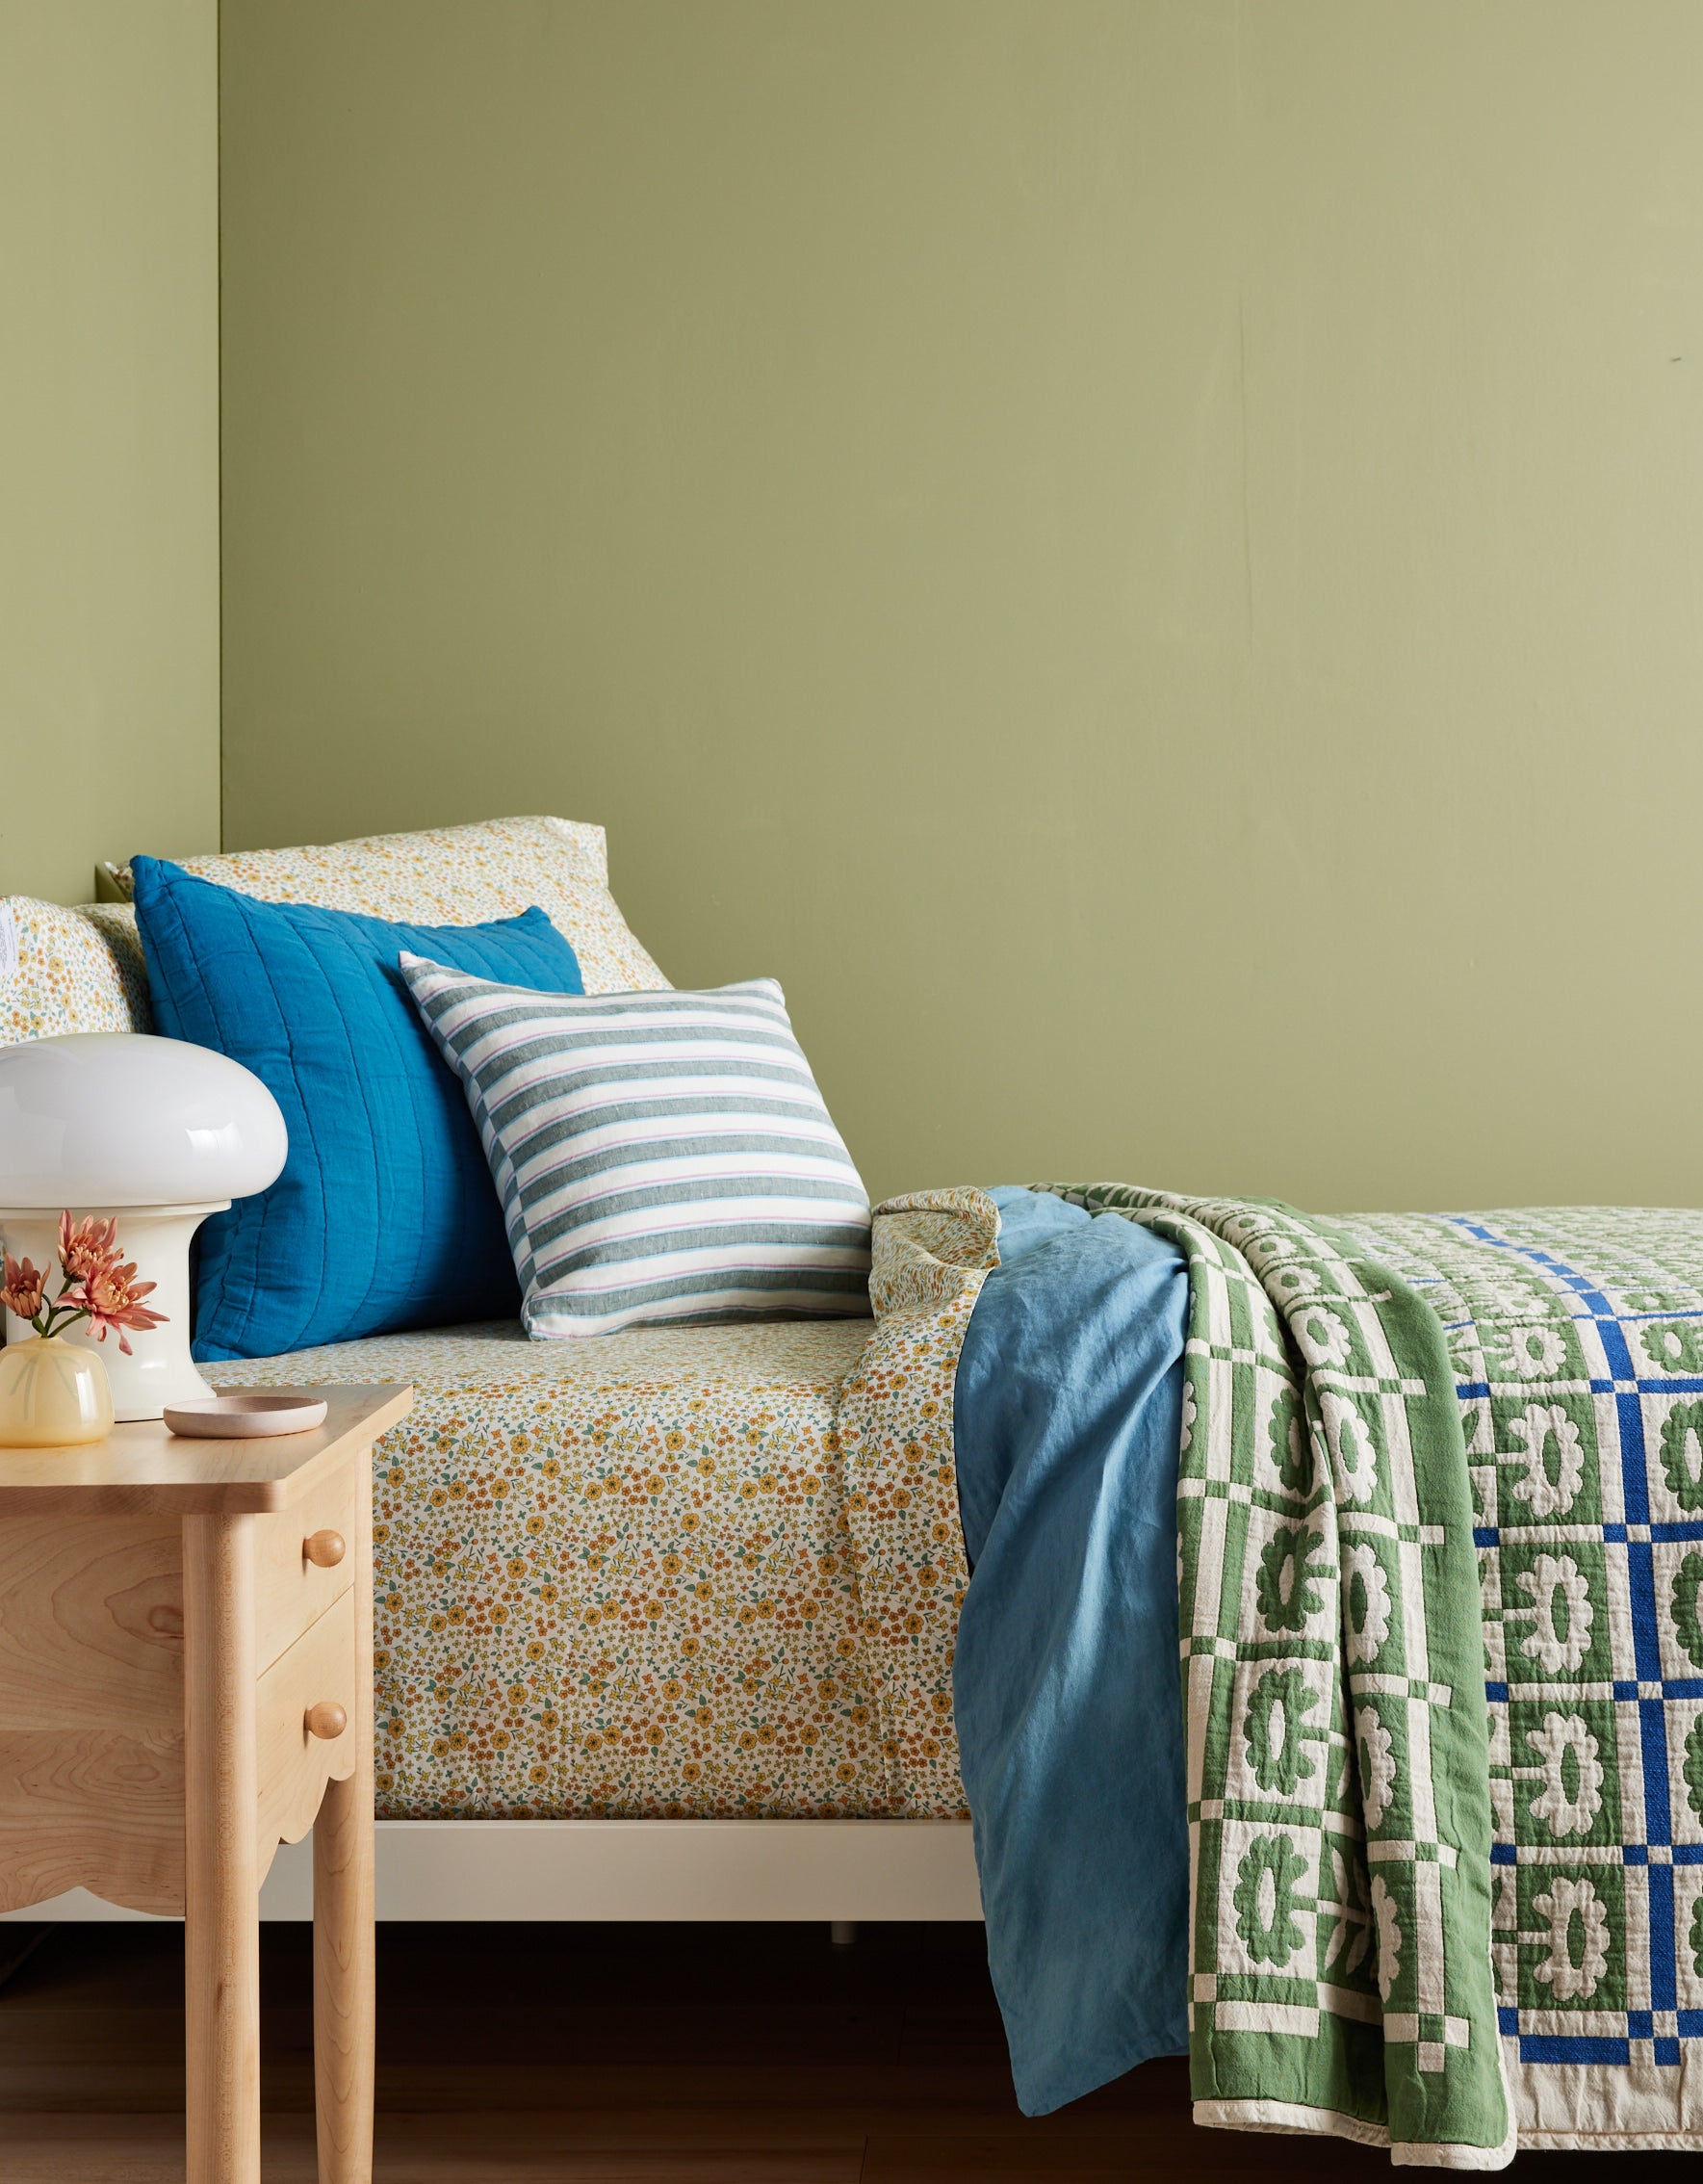 A spring inspired bedroom.